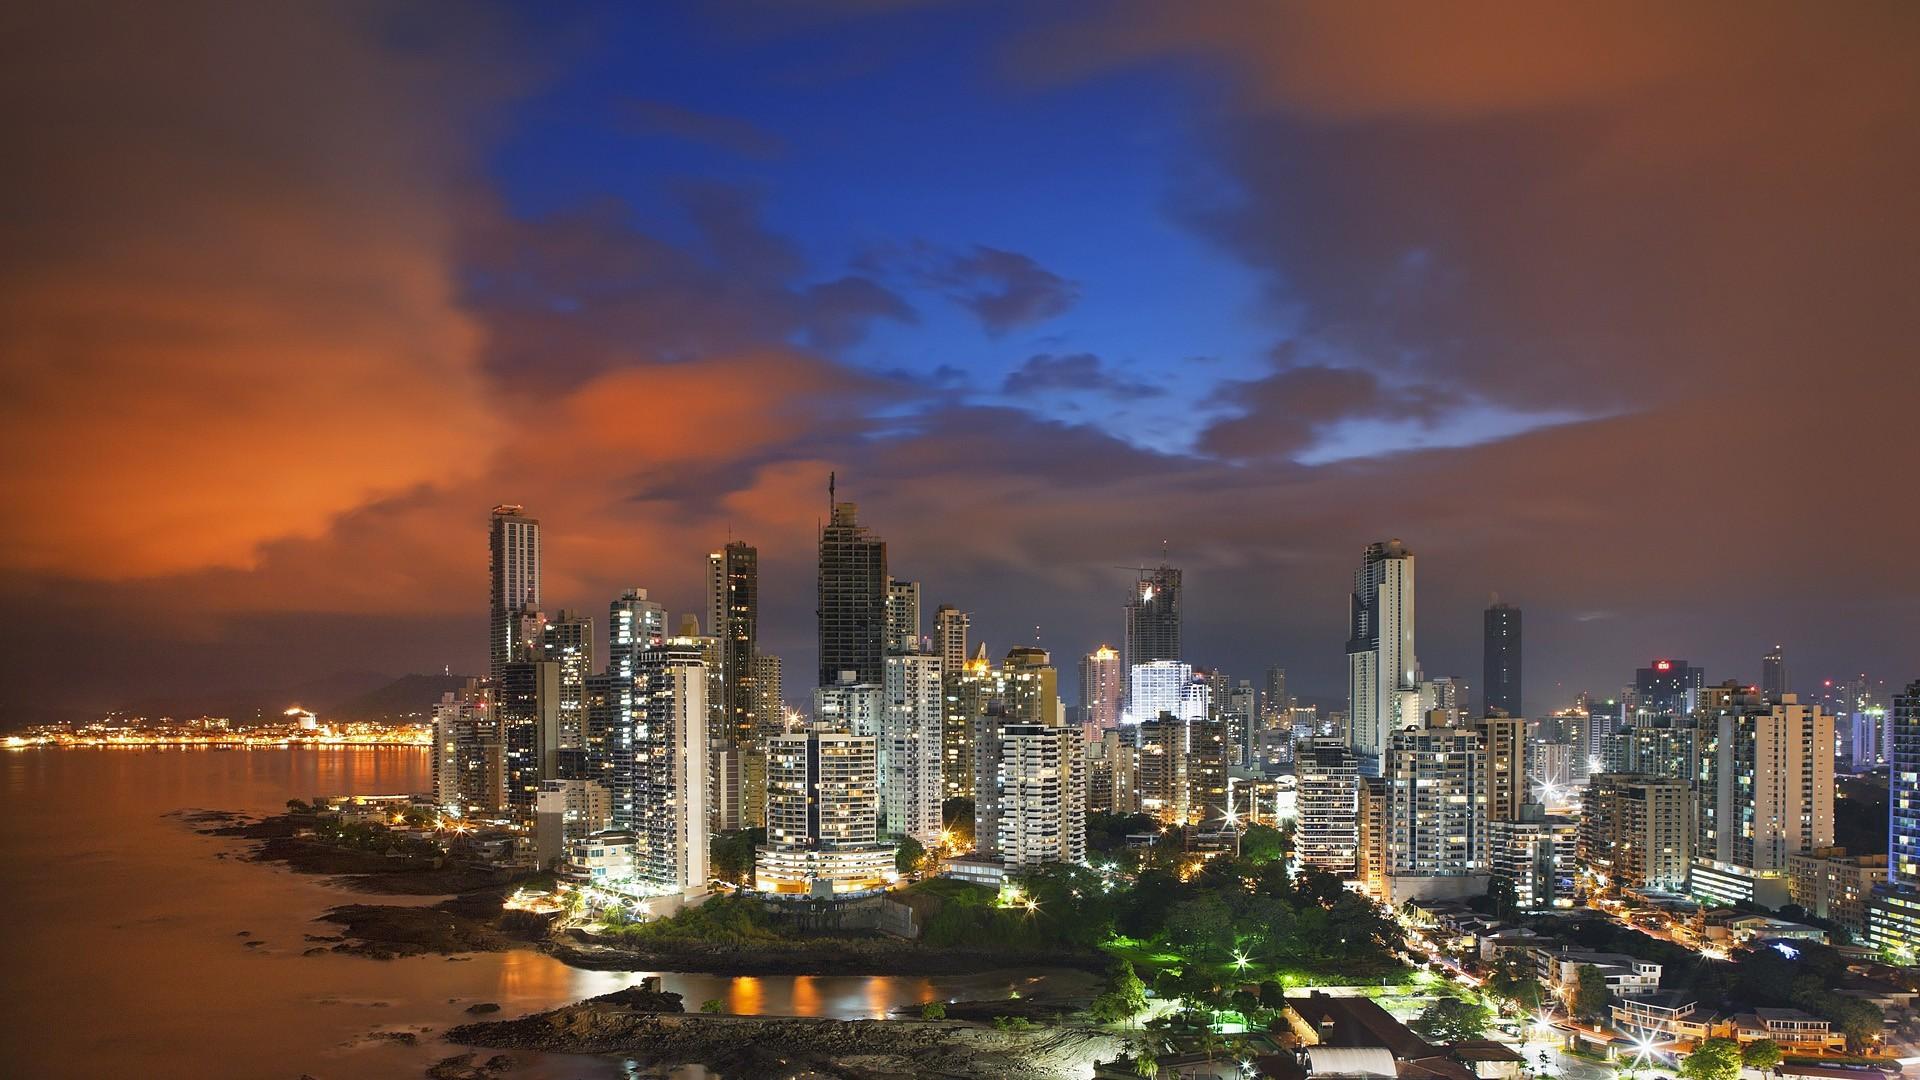 City of Panama in the evening wallpaper and image